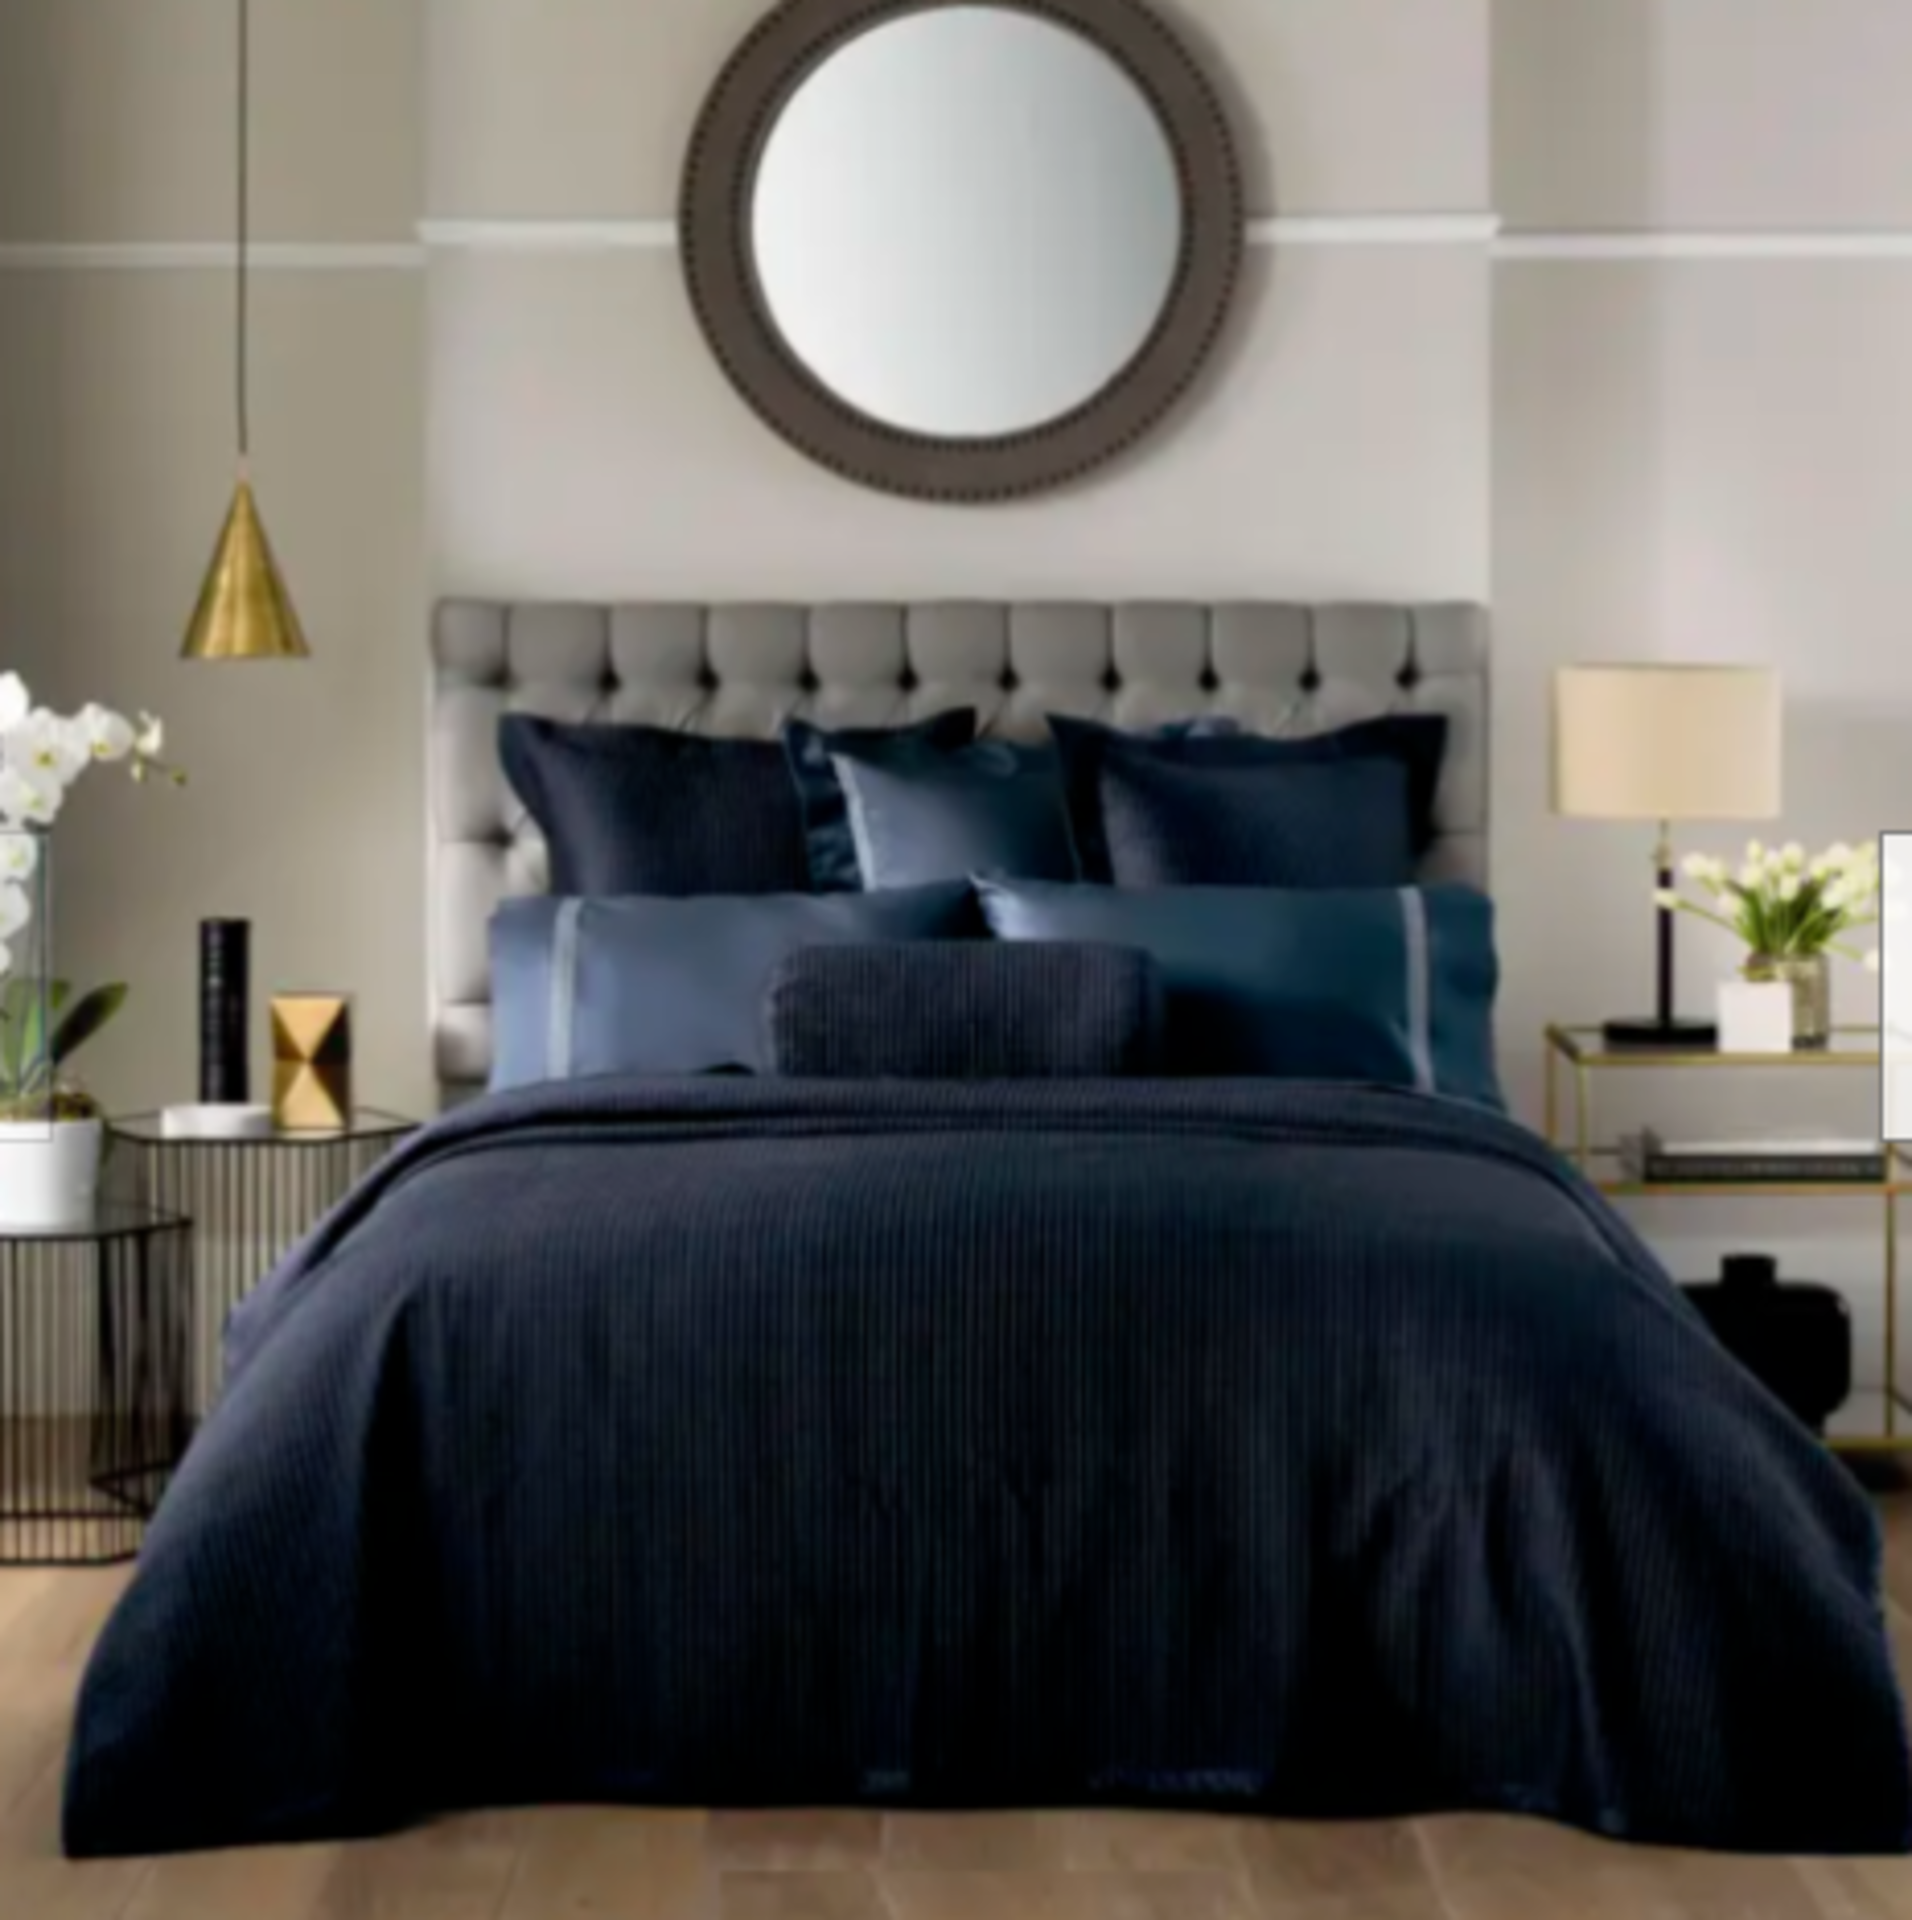 3X Sheridan - Midnight Bed Skirt - New & Packaged. RRP £75 Each.